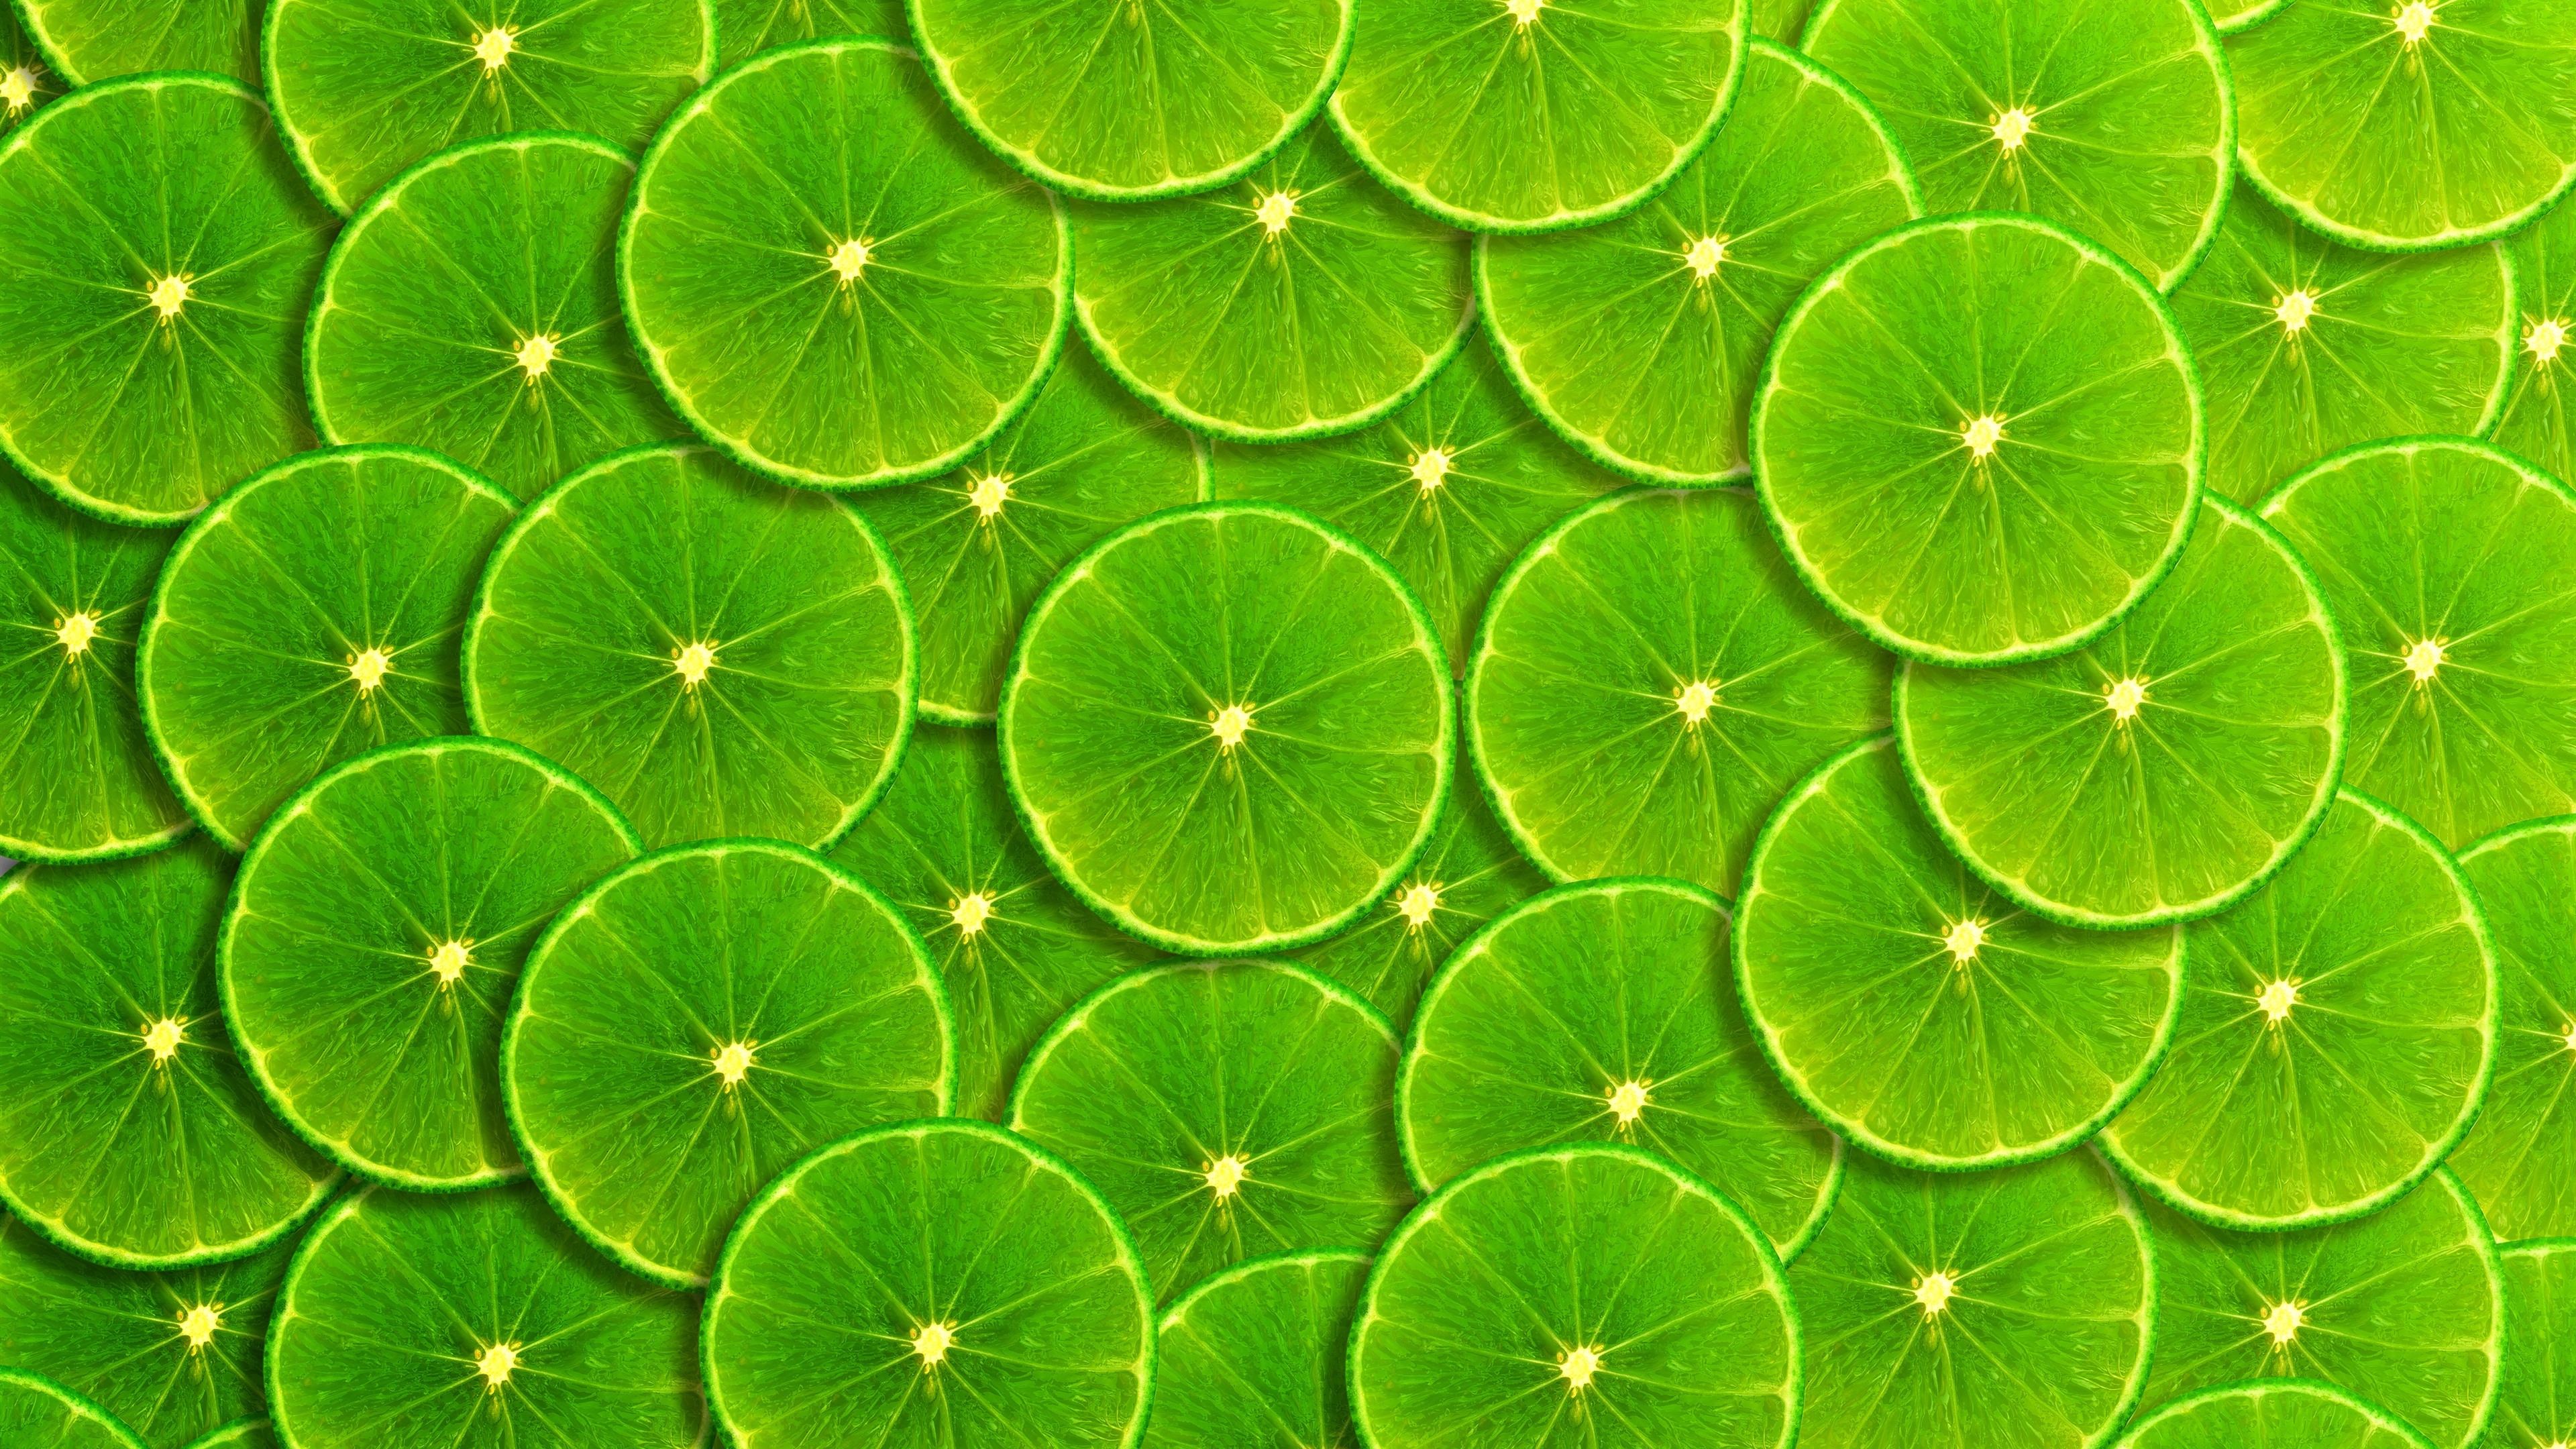 Green Lemon Slices Background 1125x2436 IPhone 11 Pro XS X Wallpaper, Background, Picture, Image